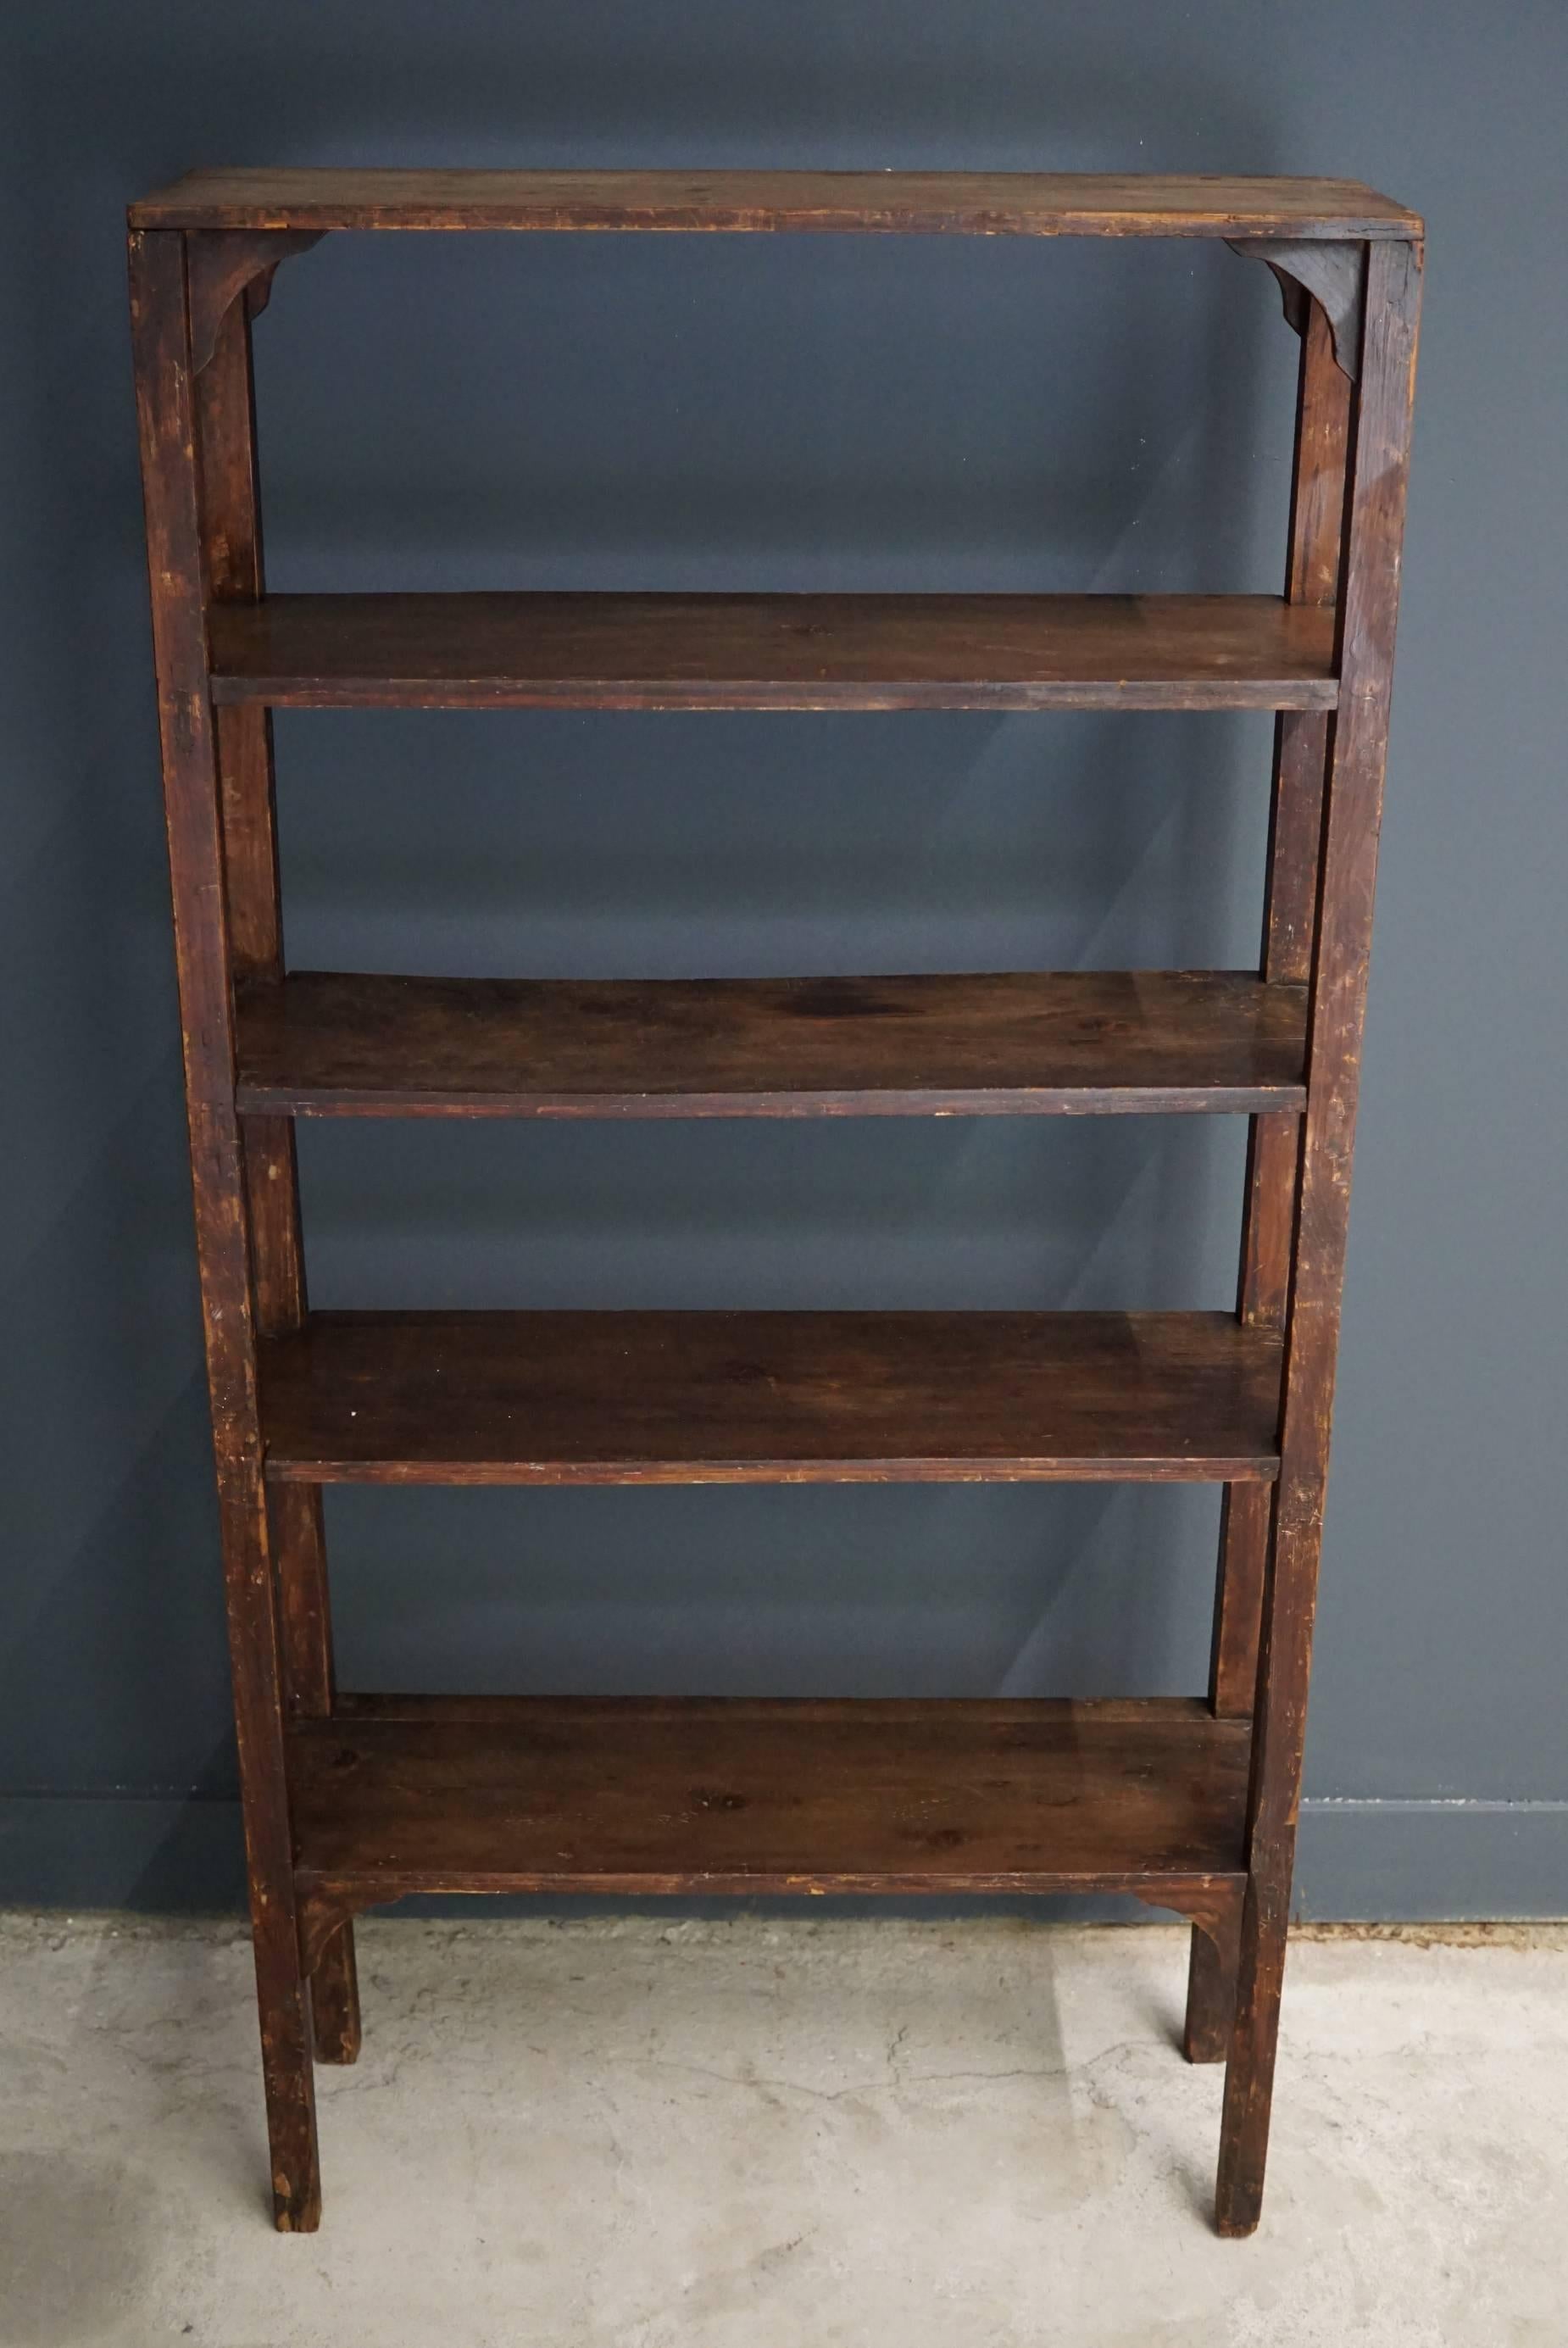 Industrial Mid-20th Century Pine Shelving Unit